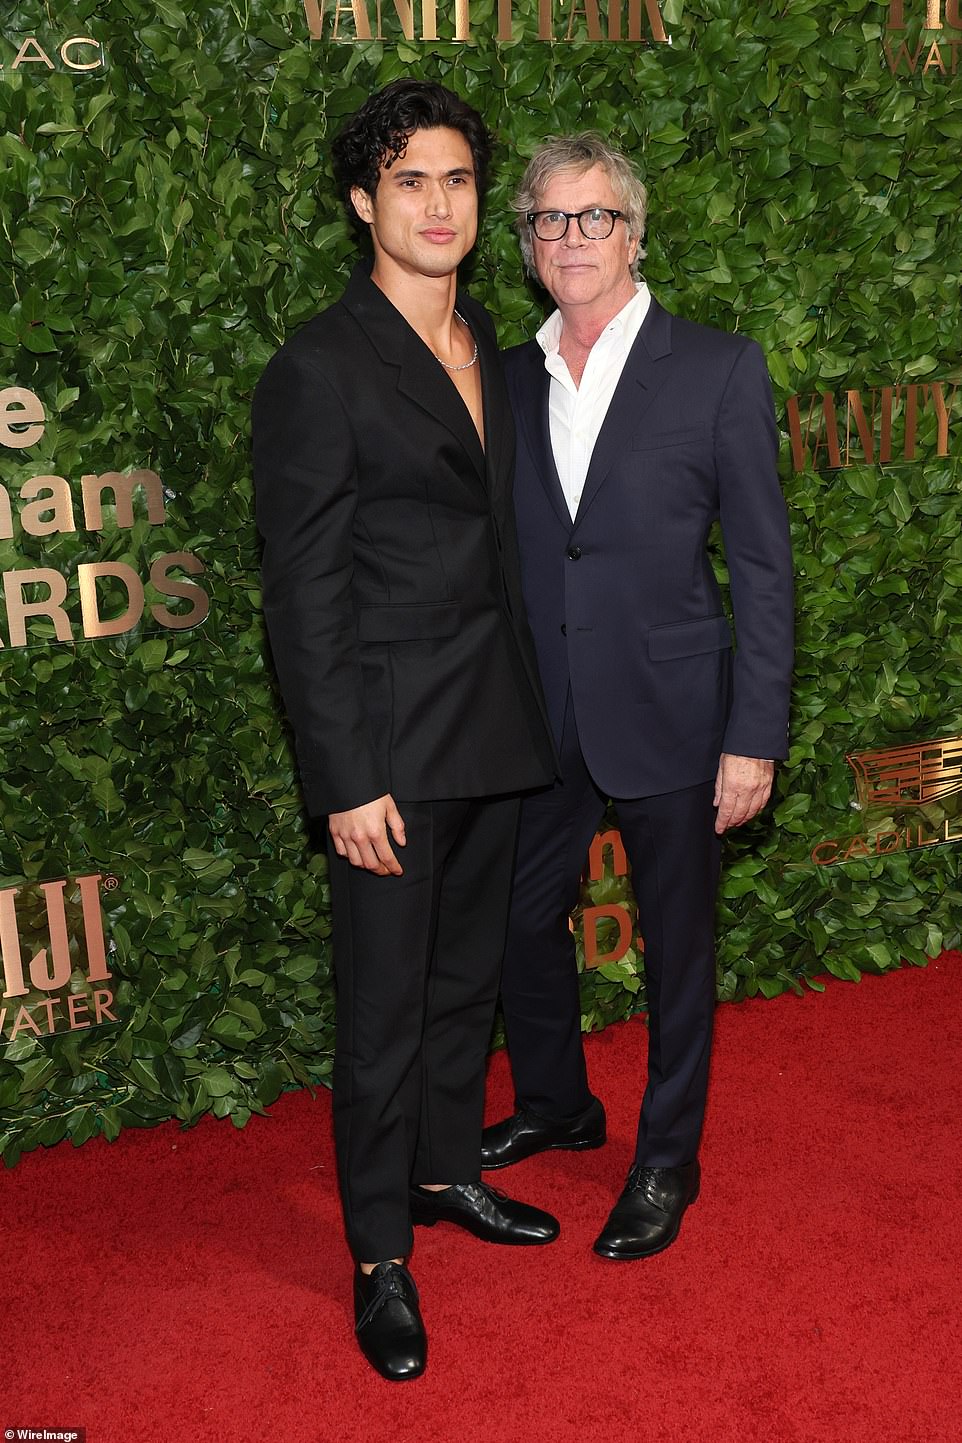 A major achievement: While on the red carpet, he posed for a photo with Todd Haynes, who directed his film May December (2023)